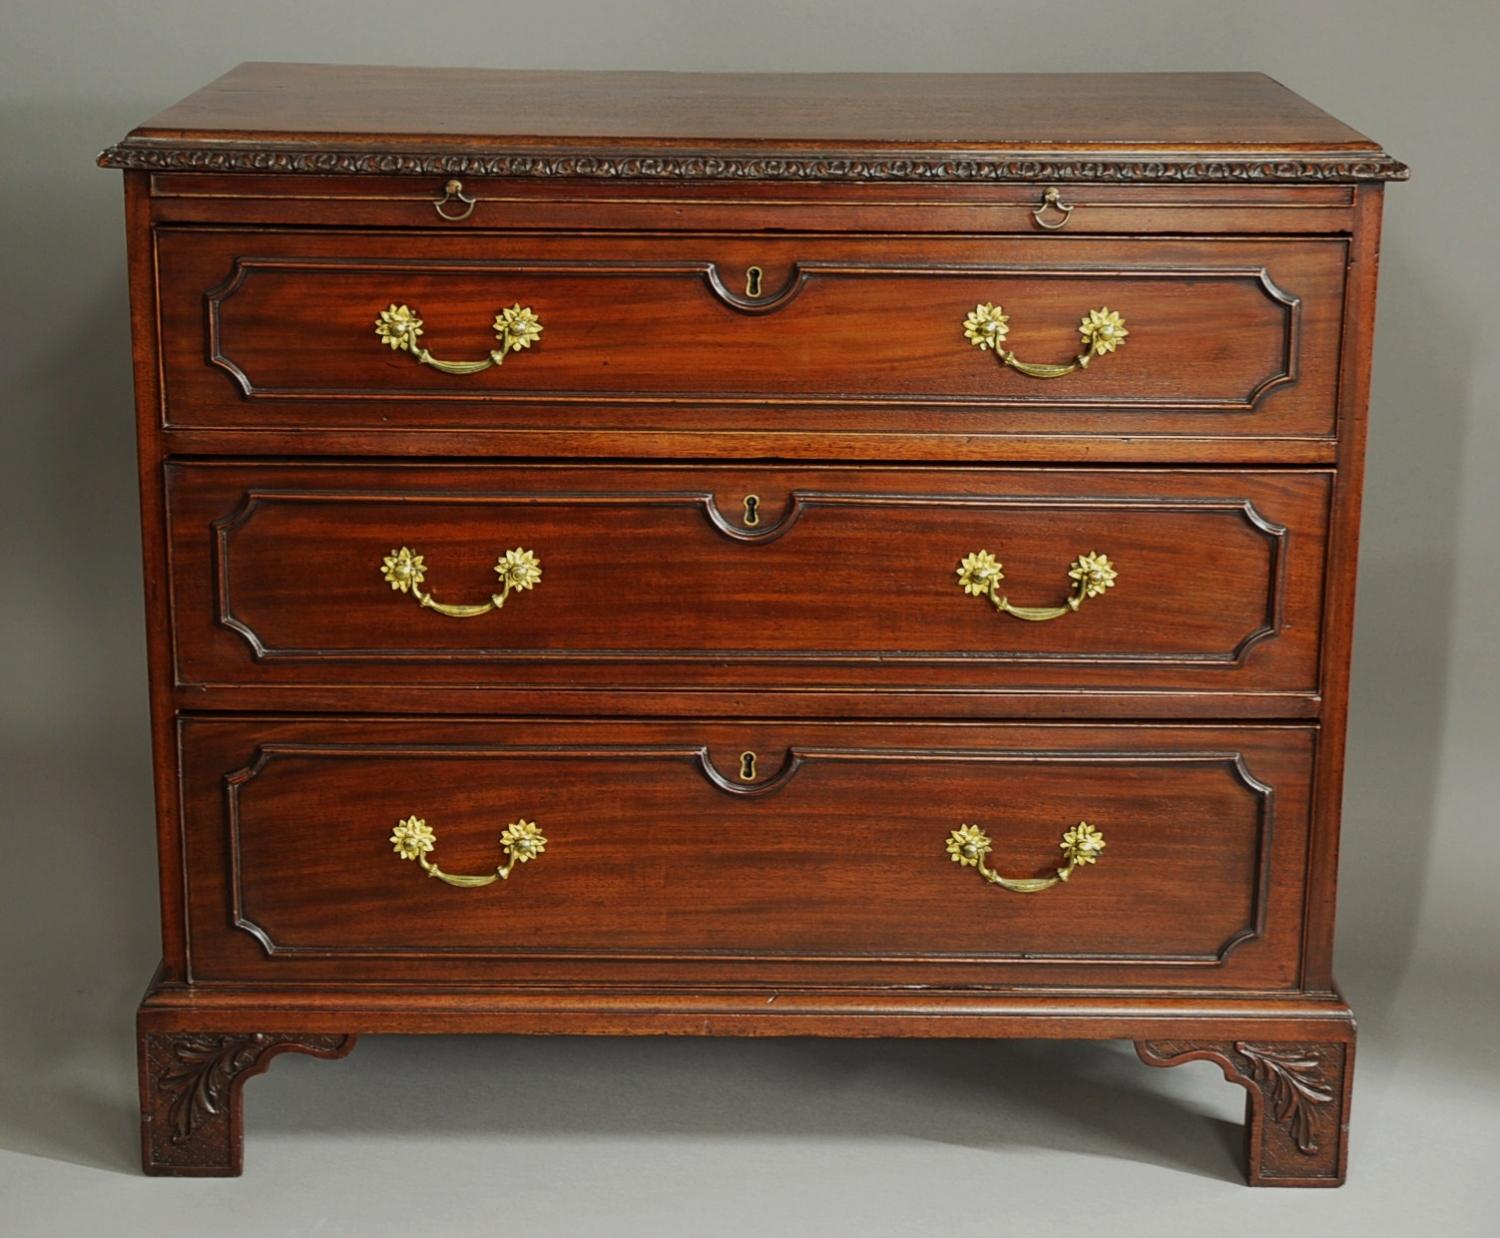 Charmimg late 19th century mahogany chest of drawers